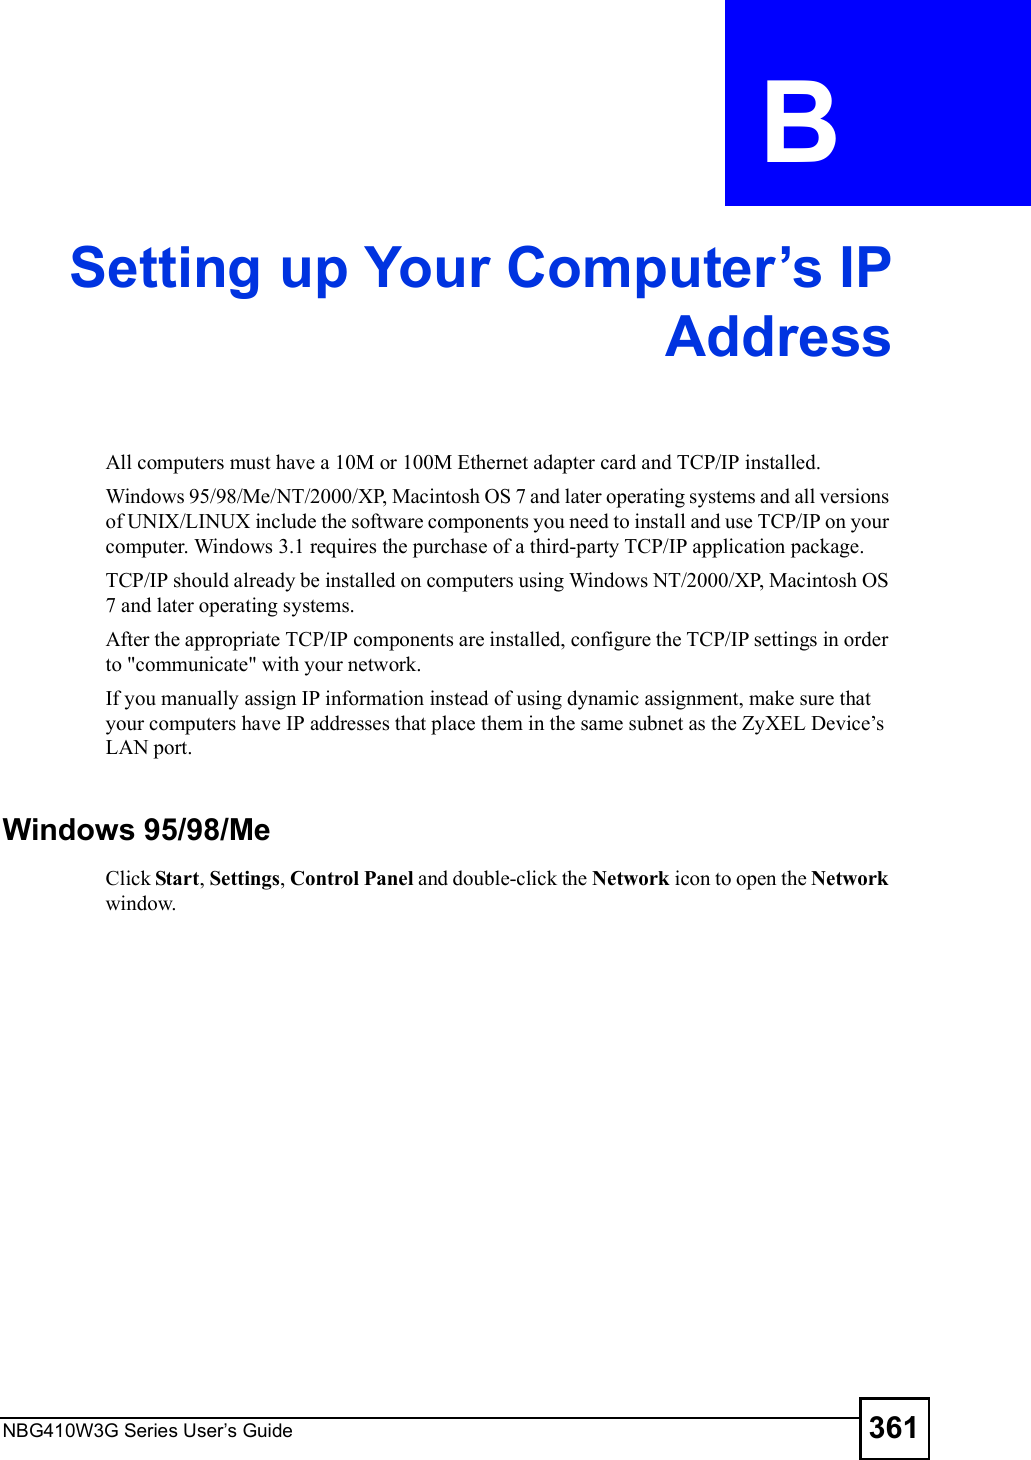 NBG410W3G Series User s Guide 361APPENDIX  B Setting up Your Computer s IPAddressAll computers must have a 10M or 100M Ethernet adapter card and TCP/IP installed. Windows 95/98/Me/NT/2000/XP, Macintosh OS 7 and later operating systems and all versions of UNIX/LINUX include the software components you need to install and use TCP/IP on your computer. Windows 3.1 requires the purchase of a third-party TCP/IP application package.TCP/IP should already be installed on computers using Windows NT/2000/XP, Macintosh OS 7 and later operating systems.After the appropriate TCP/IP components are installed, configure the TCP/IP settings in order to &quot;communicate&quot; with your network. If you manually assign IP information instead of using dynamic assignment, make sure that your computers have IP addresses that place them in the same subnet as the ZyXEL Device!s LAN port.Windows 95/98/MeClick Start, Settings, Control Panel and double-click the Network icon to open the Network window.